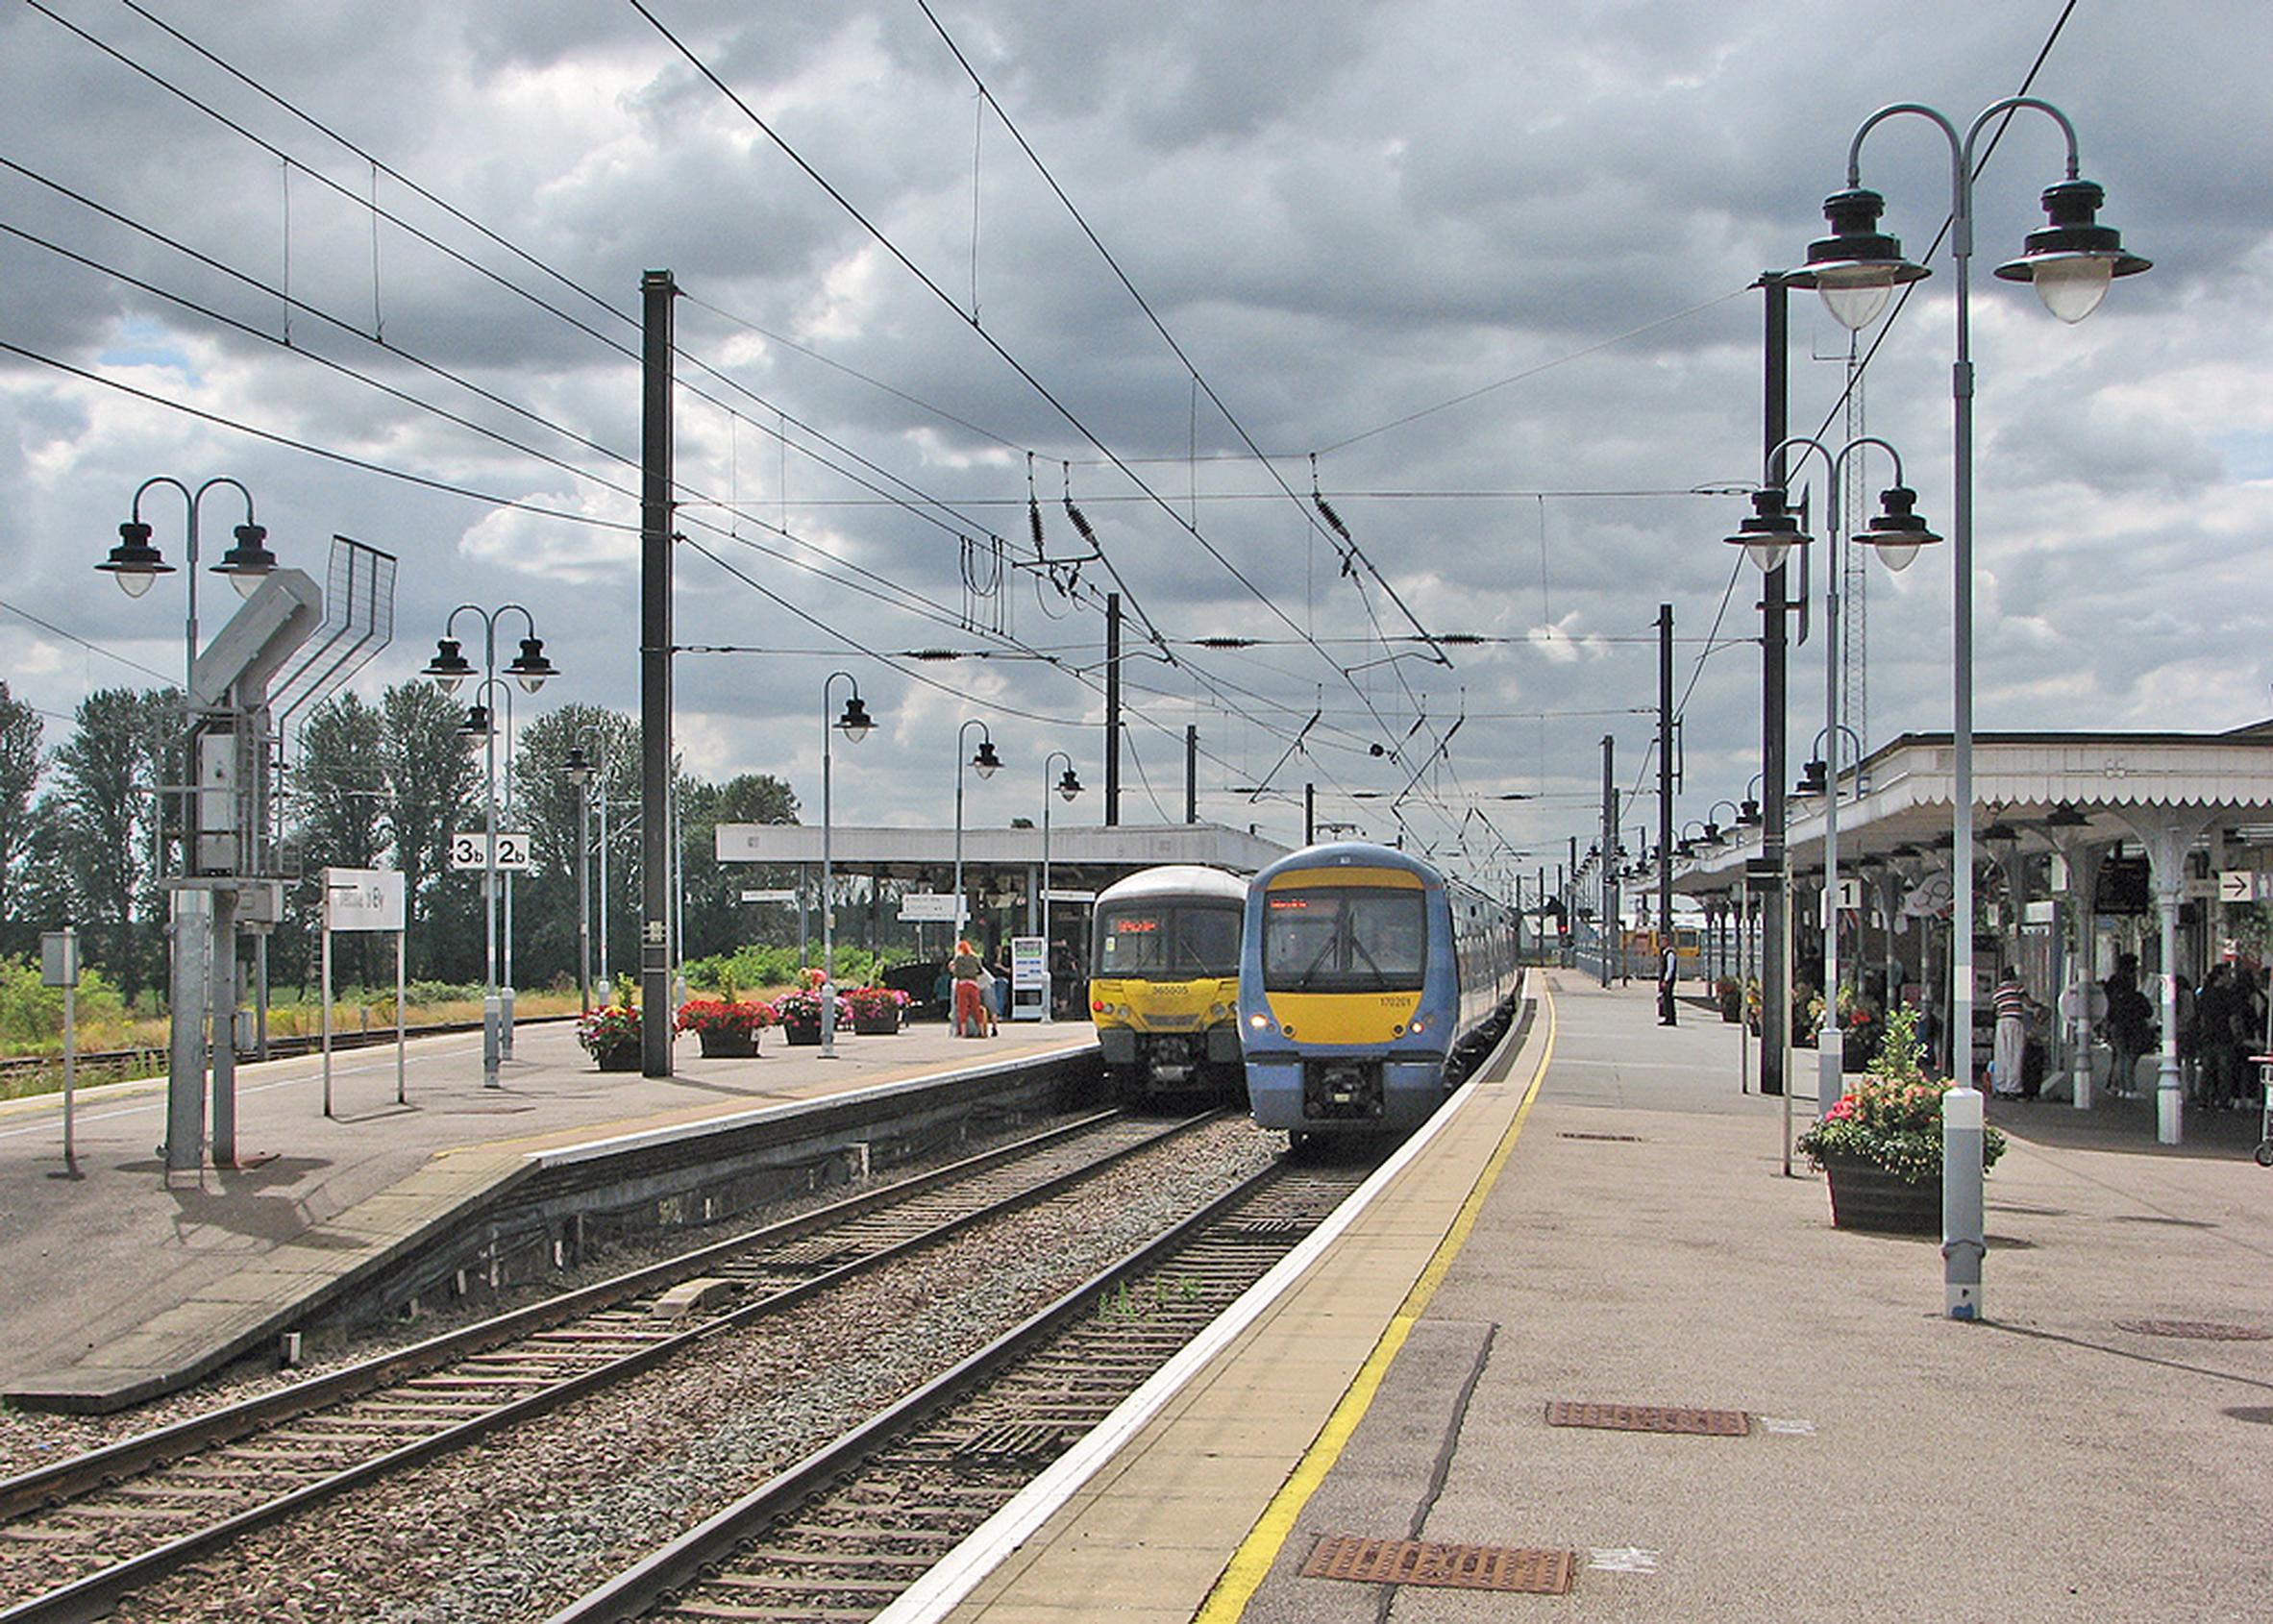 Ely station: capacity constrained